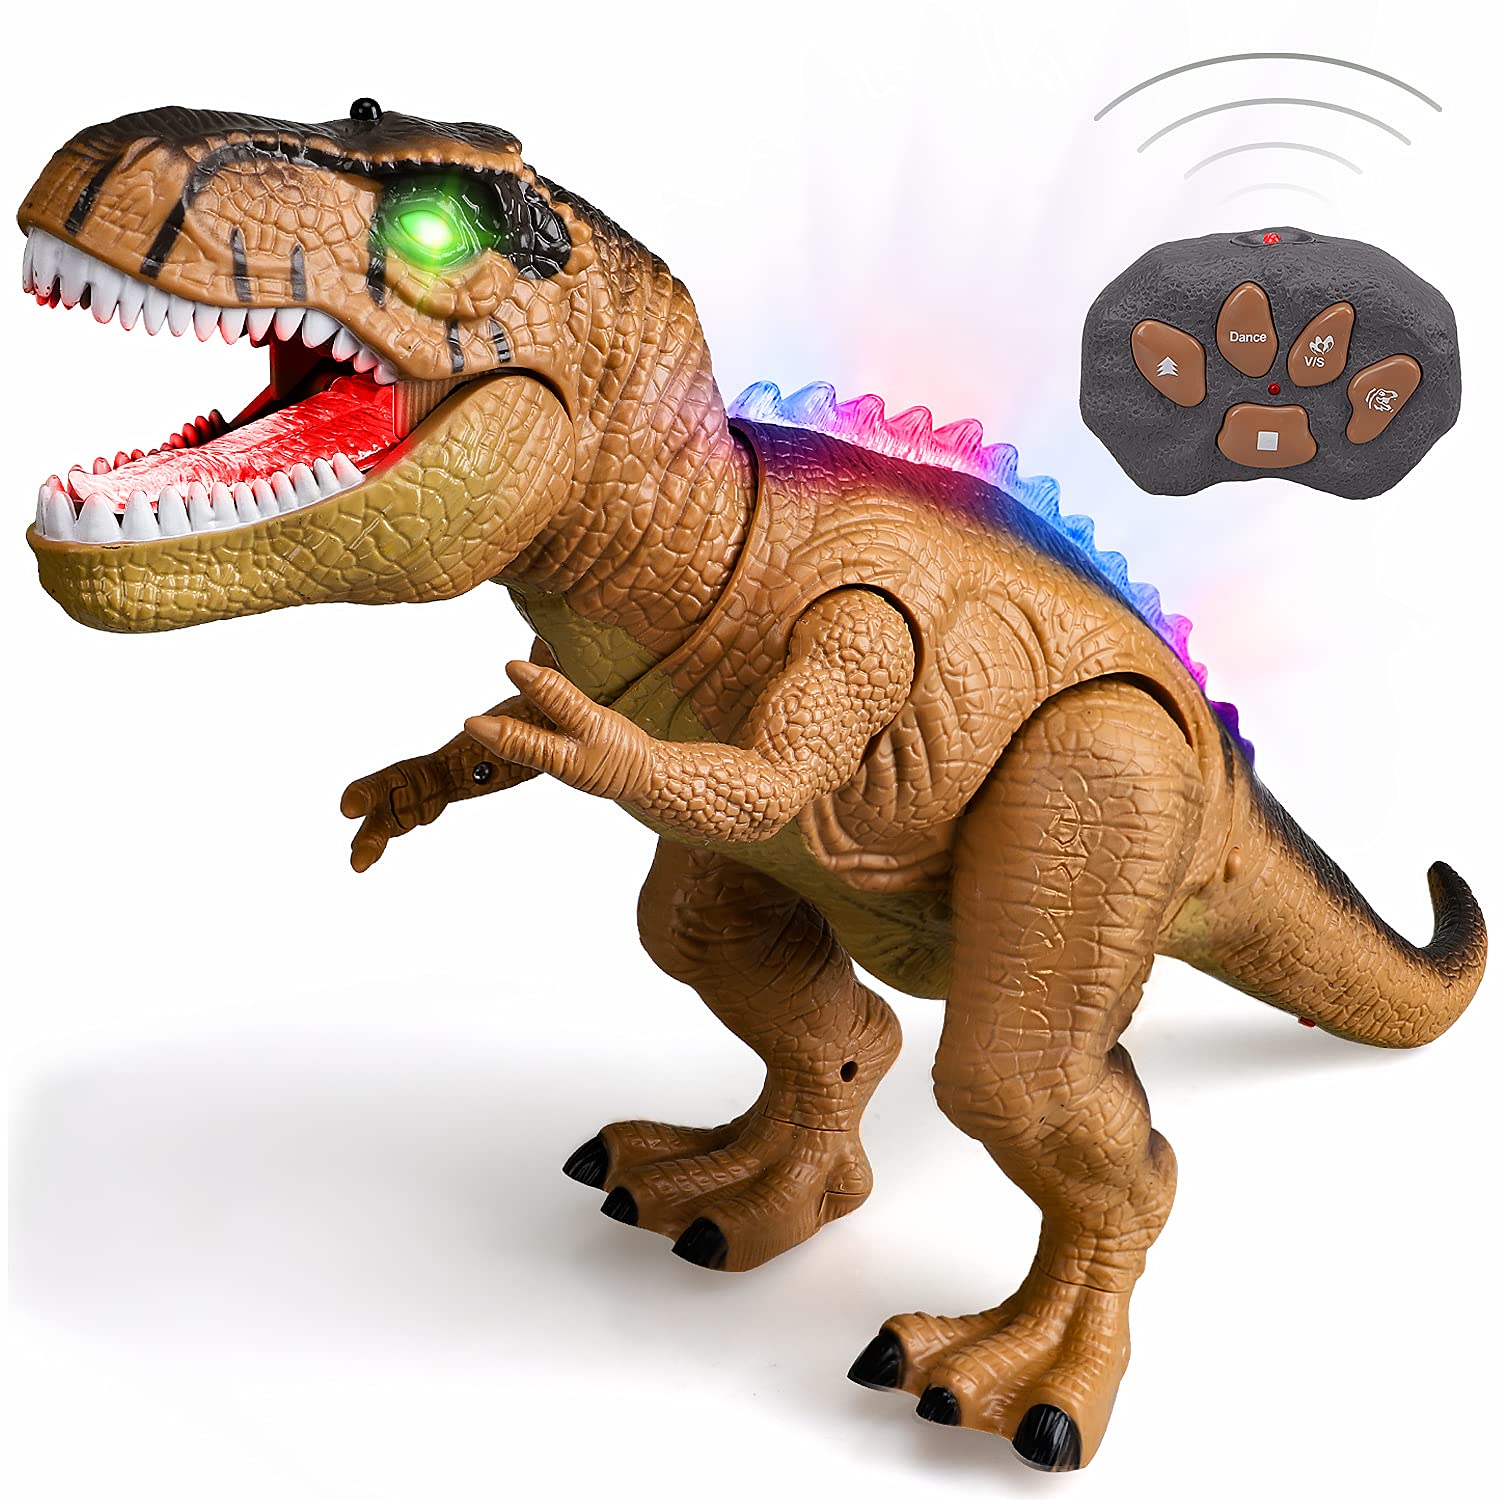 STEAM Life Remote Control Dinosaur Toys for Kids 3 4 5 6 7+ Light Up & Realistic Roaring Sound - T rex Dinosaur Toys Gifts for Christmas - Dinosaur Robot Toy for Kids Boys Girls (Green)